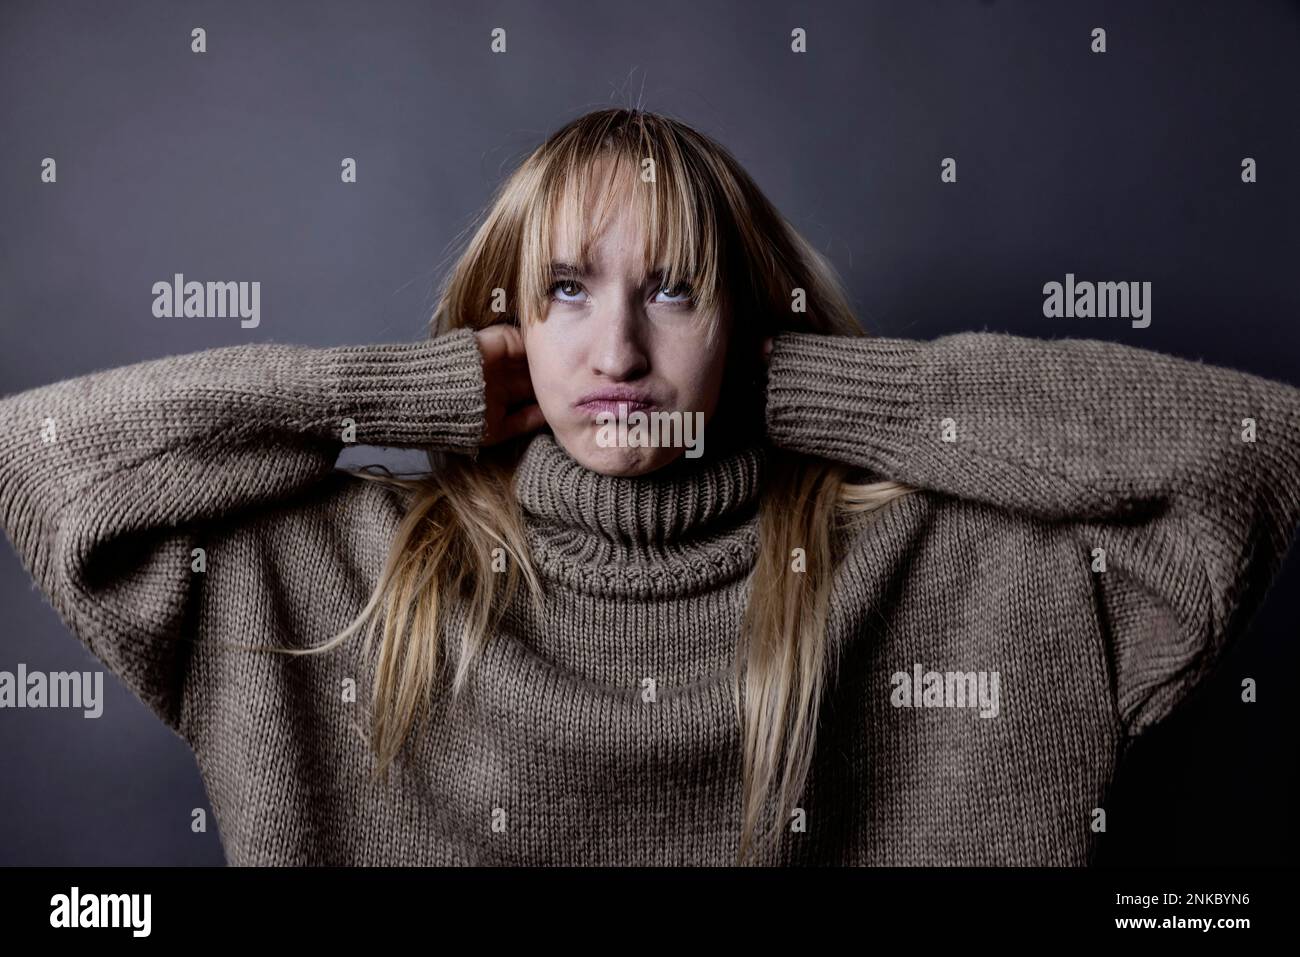 Young woman with long blond hair and a woollen jumper, arms crossed behind her head and face distorted, portrait, studio shot Stock Photo